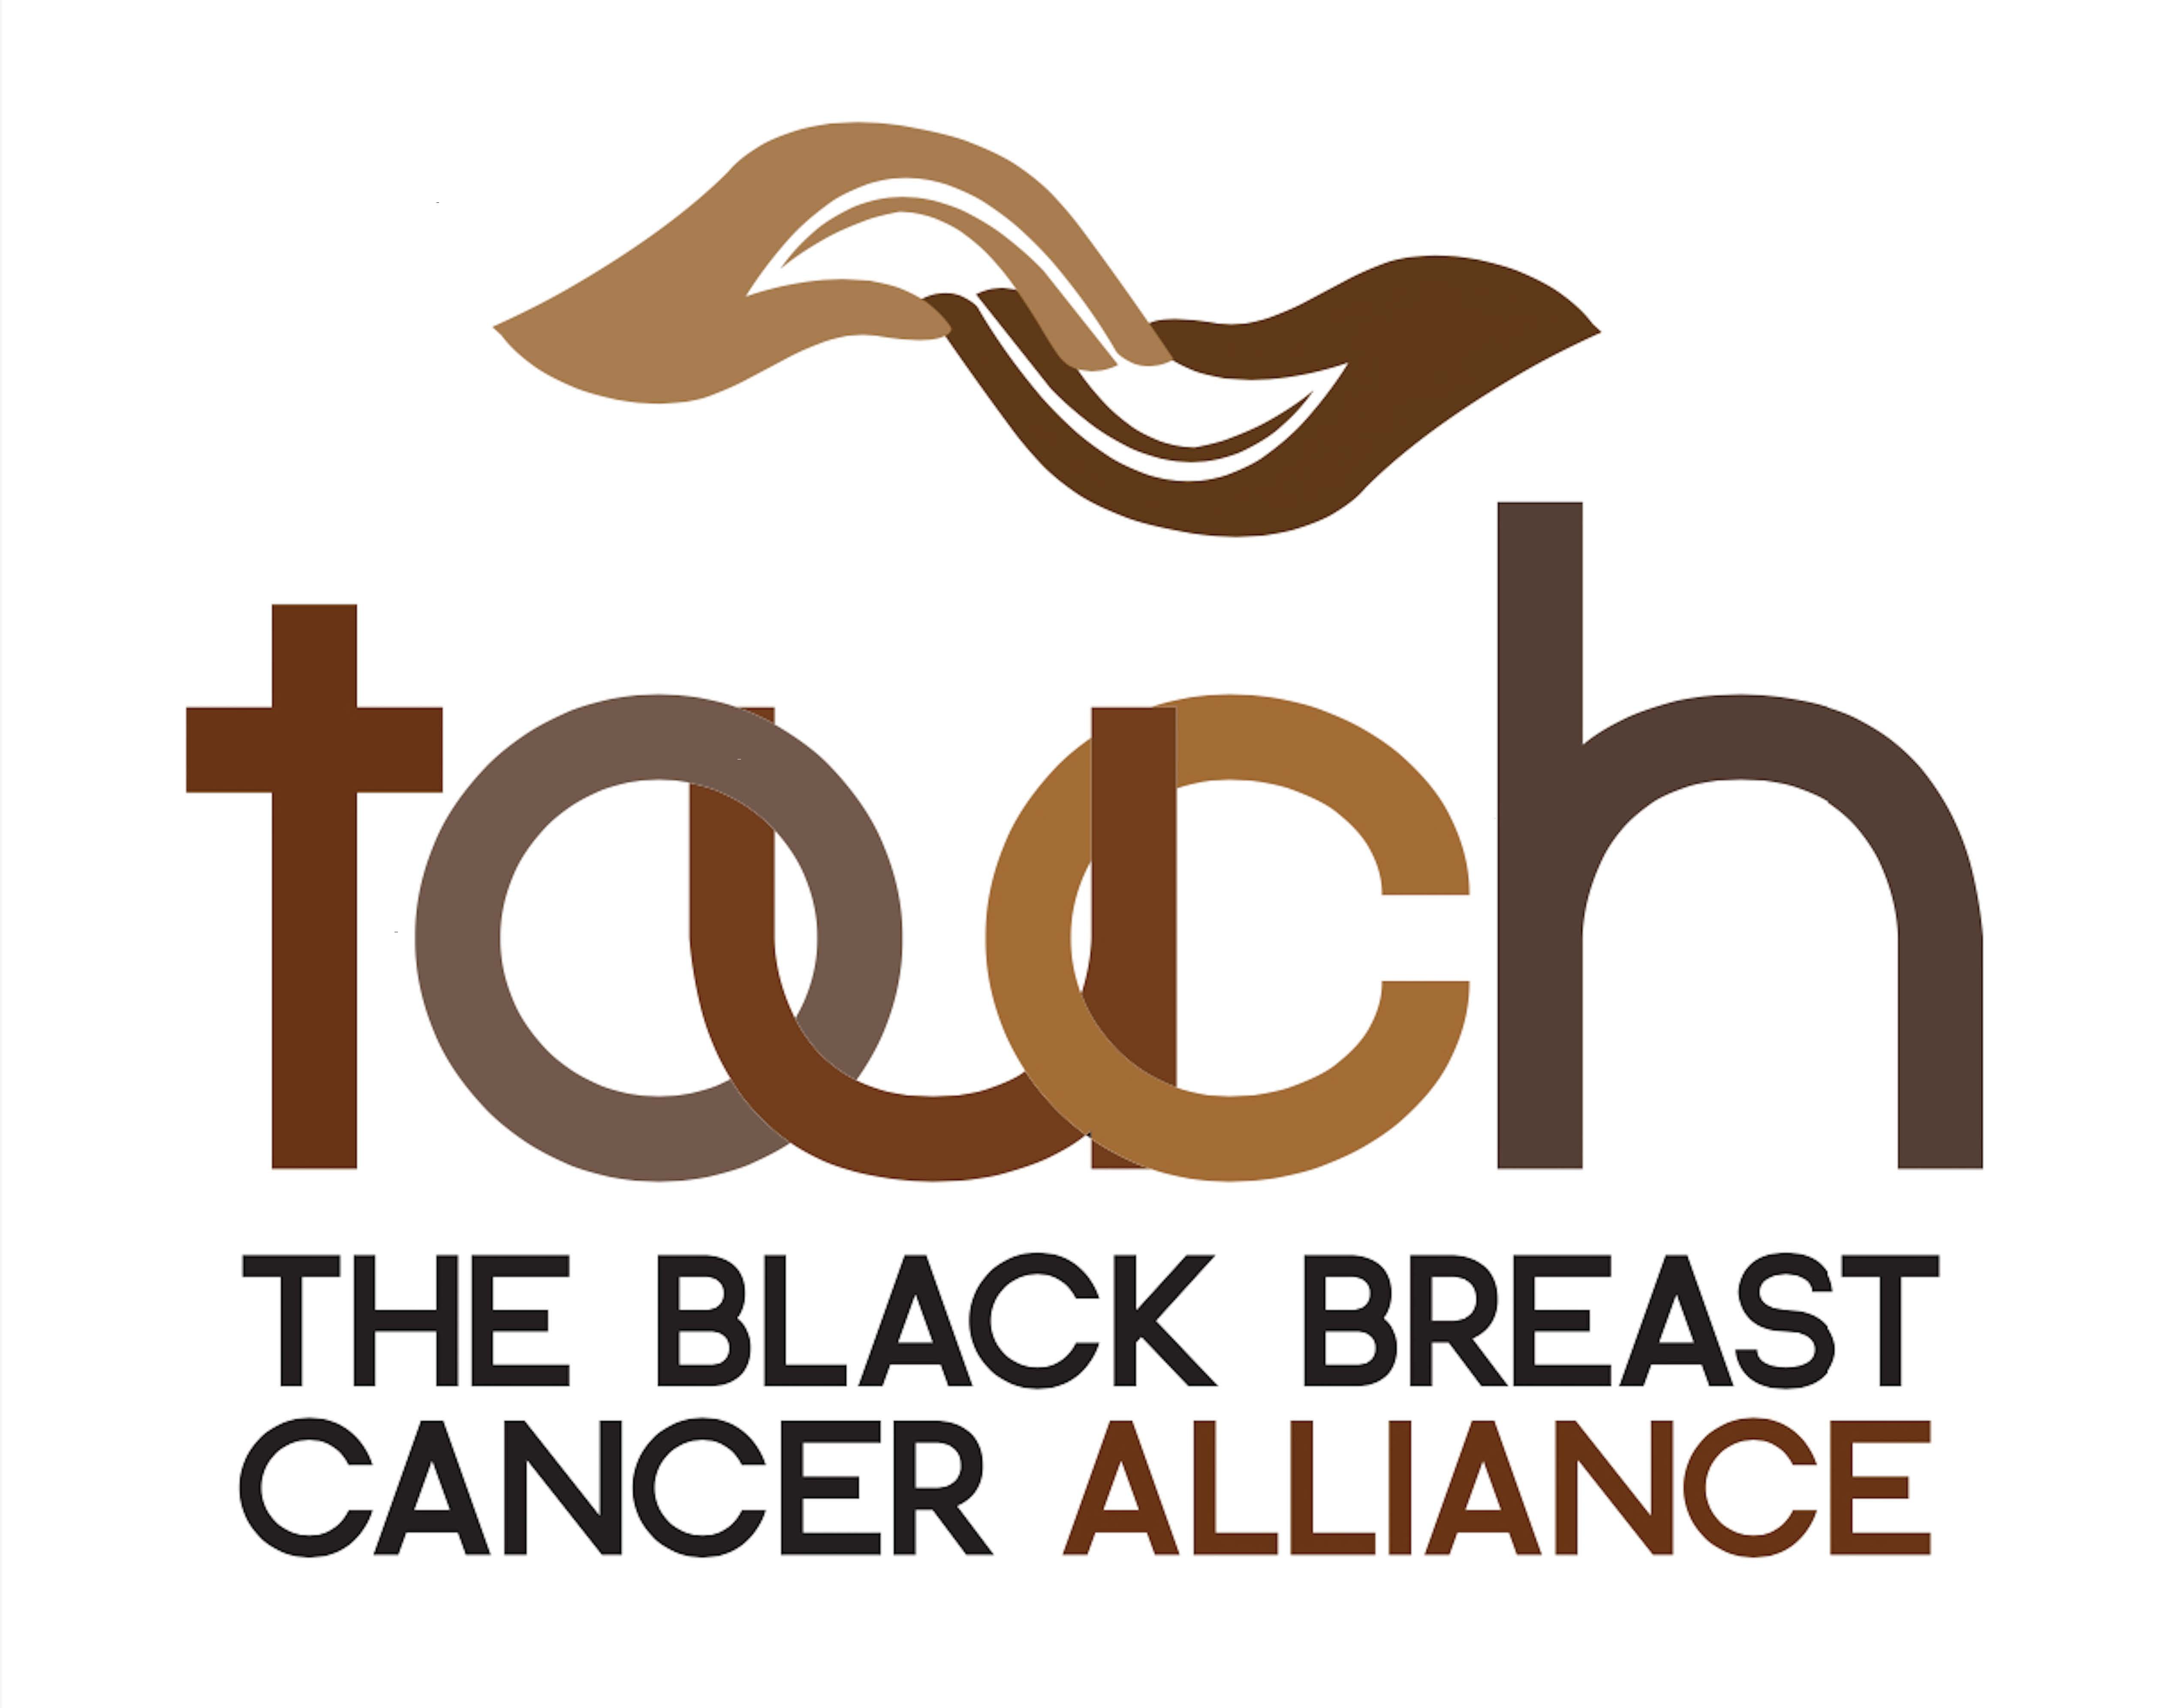 Touch, The Black Breast Cancer Alliance logo